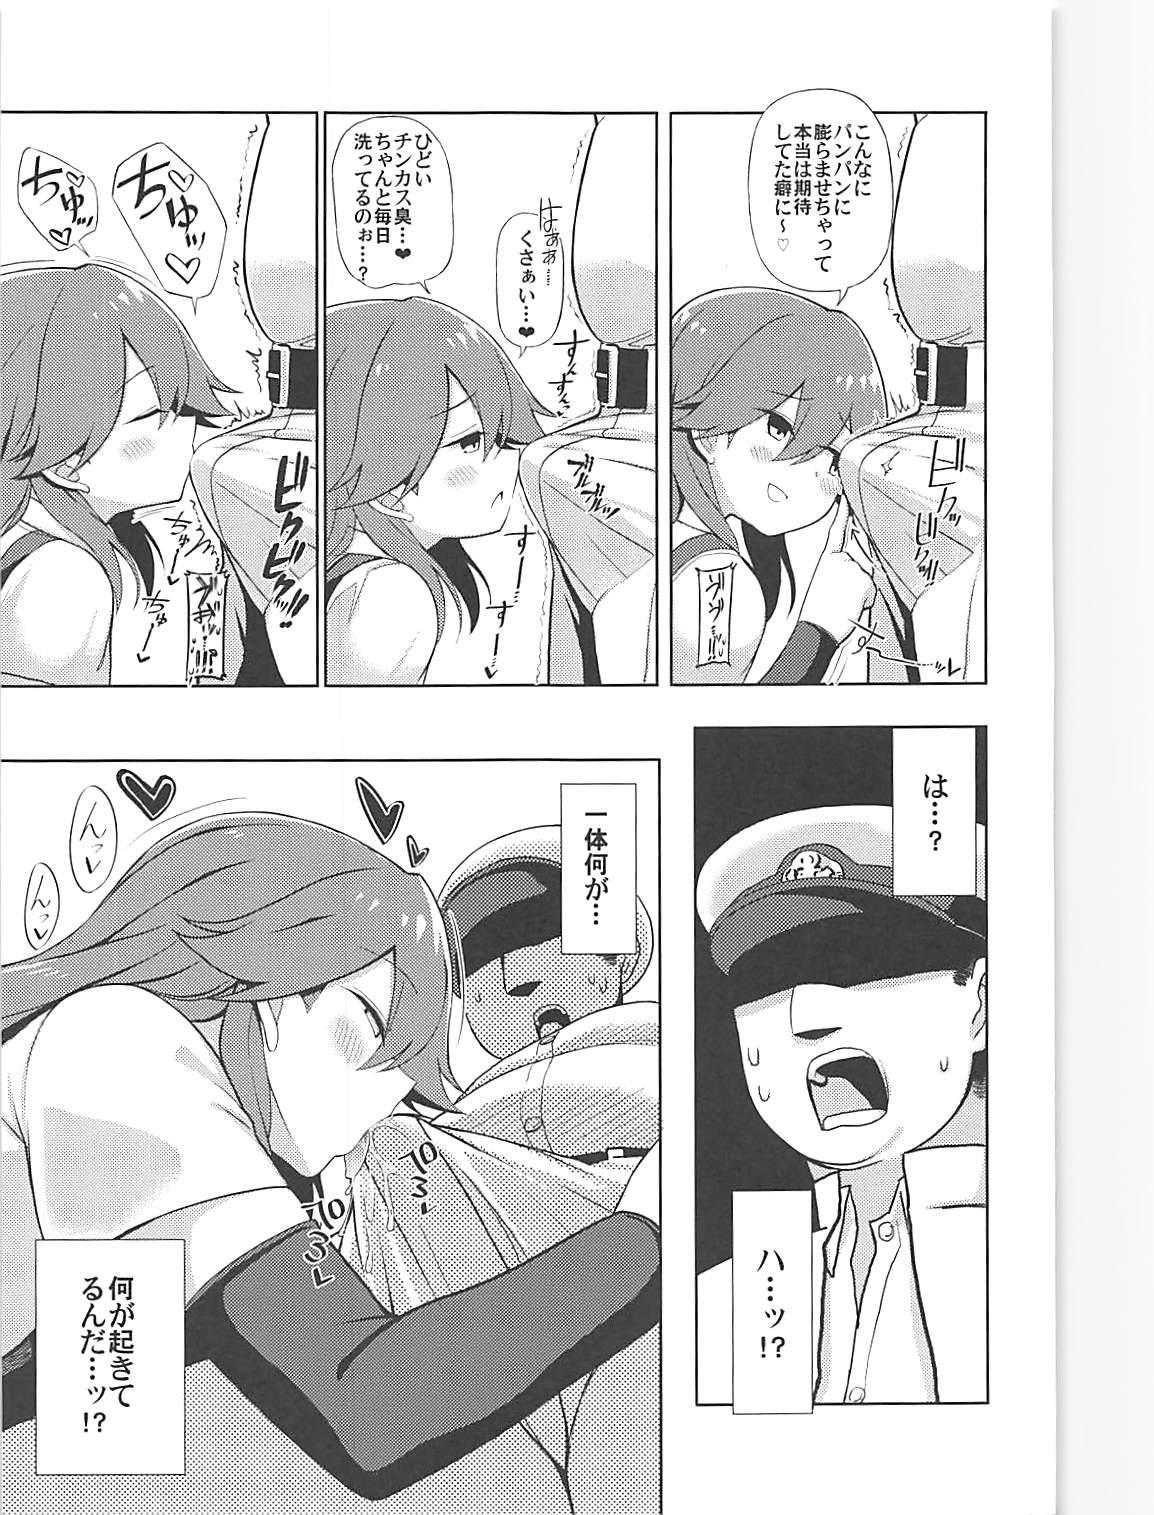 Price Little Girl Sweet Trap! - Kantai collection Celebrity Sex Scene - Page 6